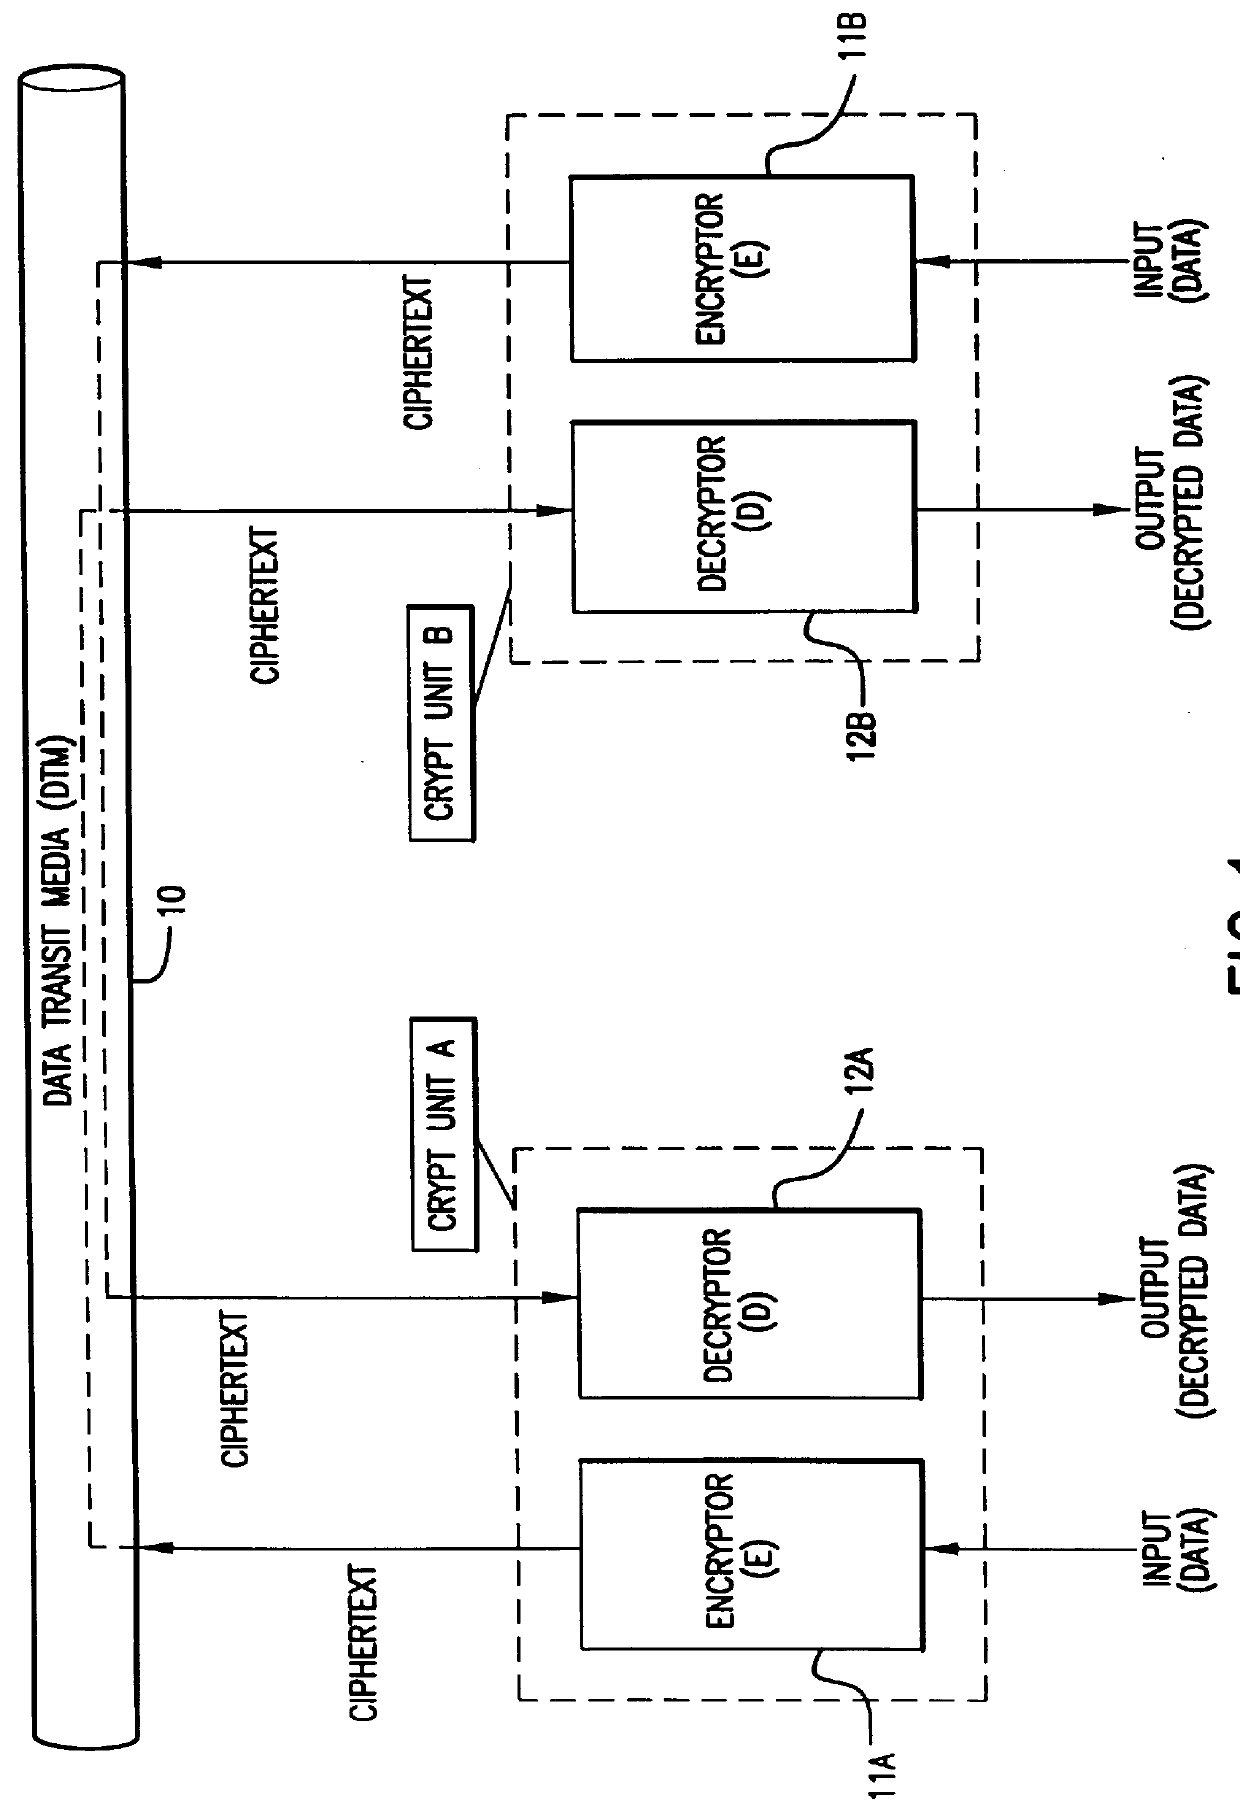 Method and apparatus for a robust high-speed cryptosystem